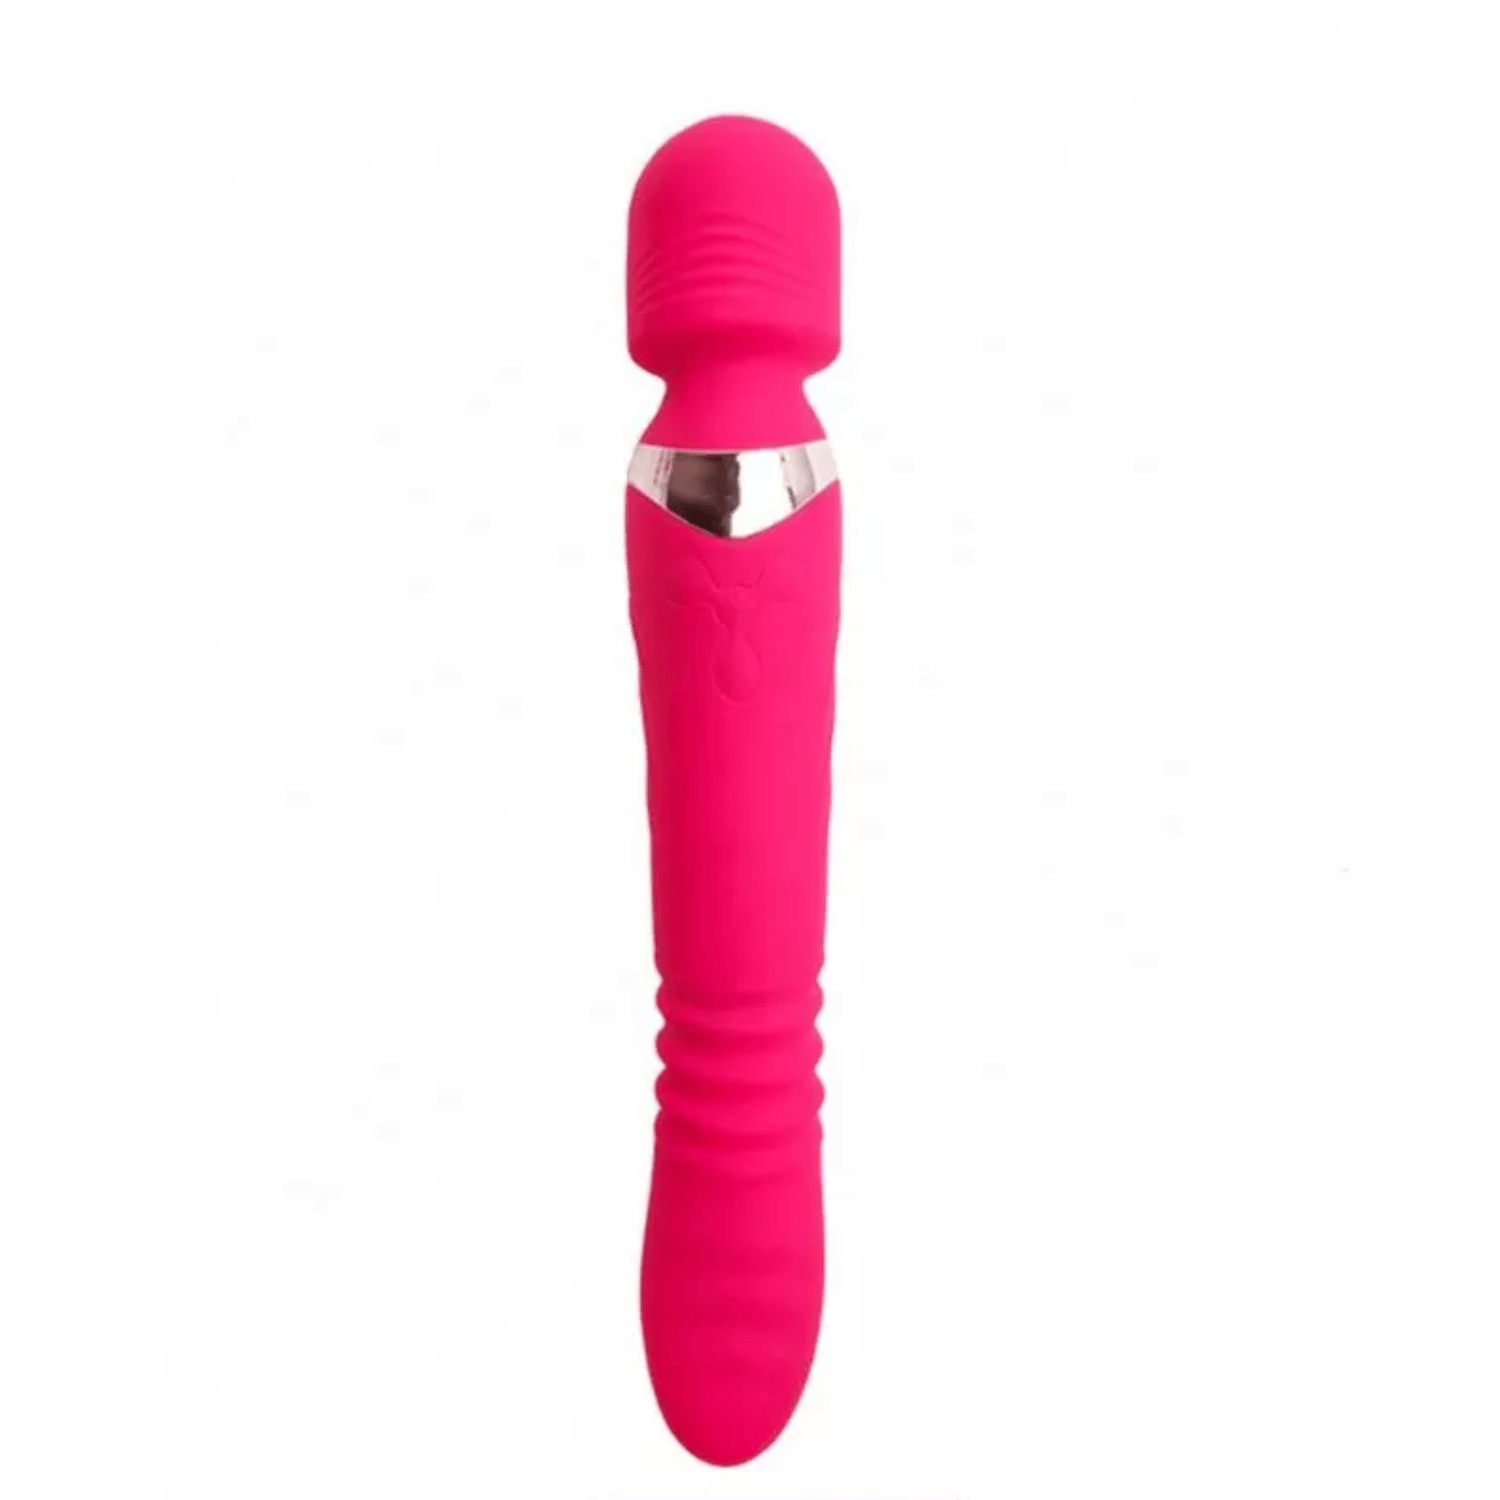 Thrusting, Rotating, & Vibrating Wand Massager | Thrusting Tension Relief Body Wand-BestGSpot